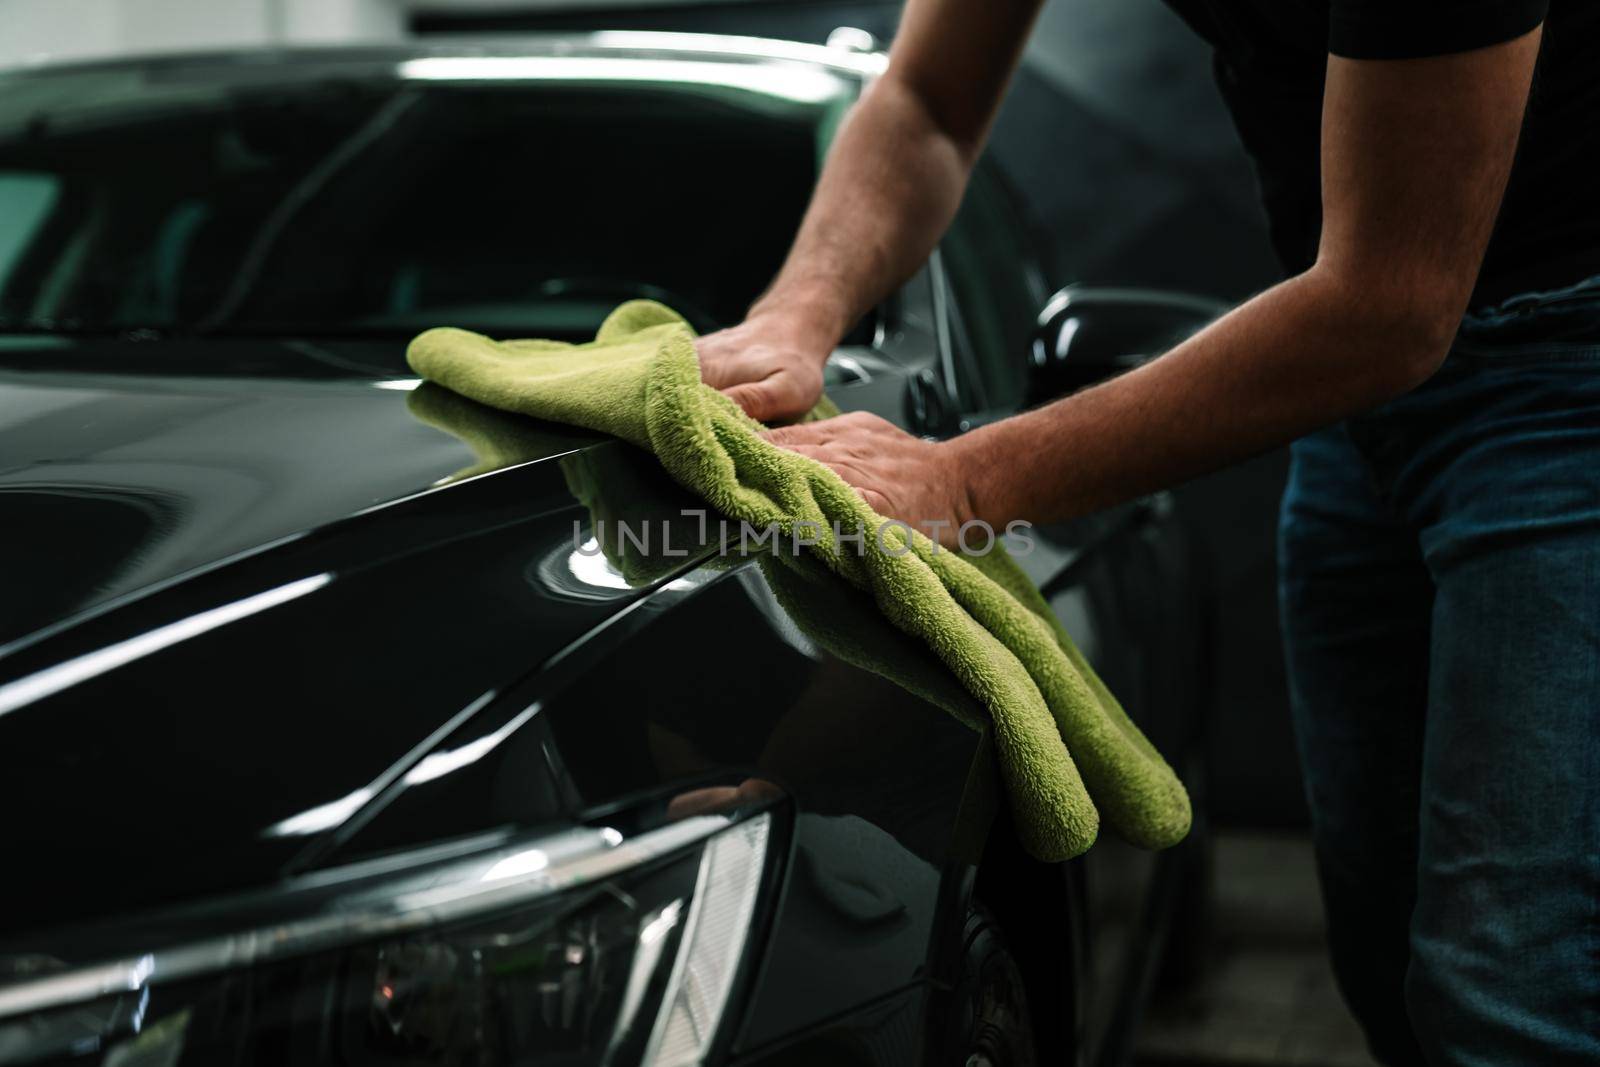 man cleans the car body with a towel. auto care.